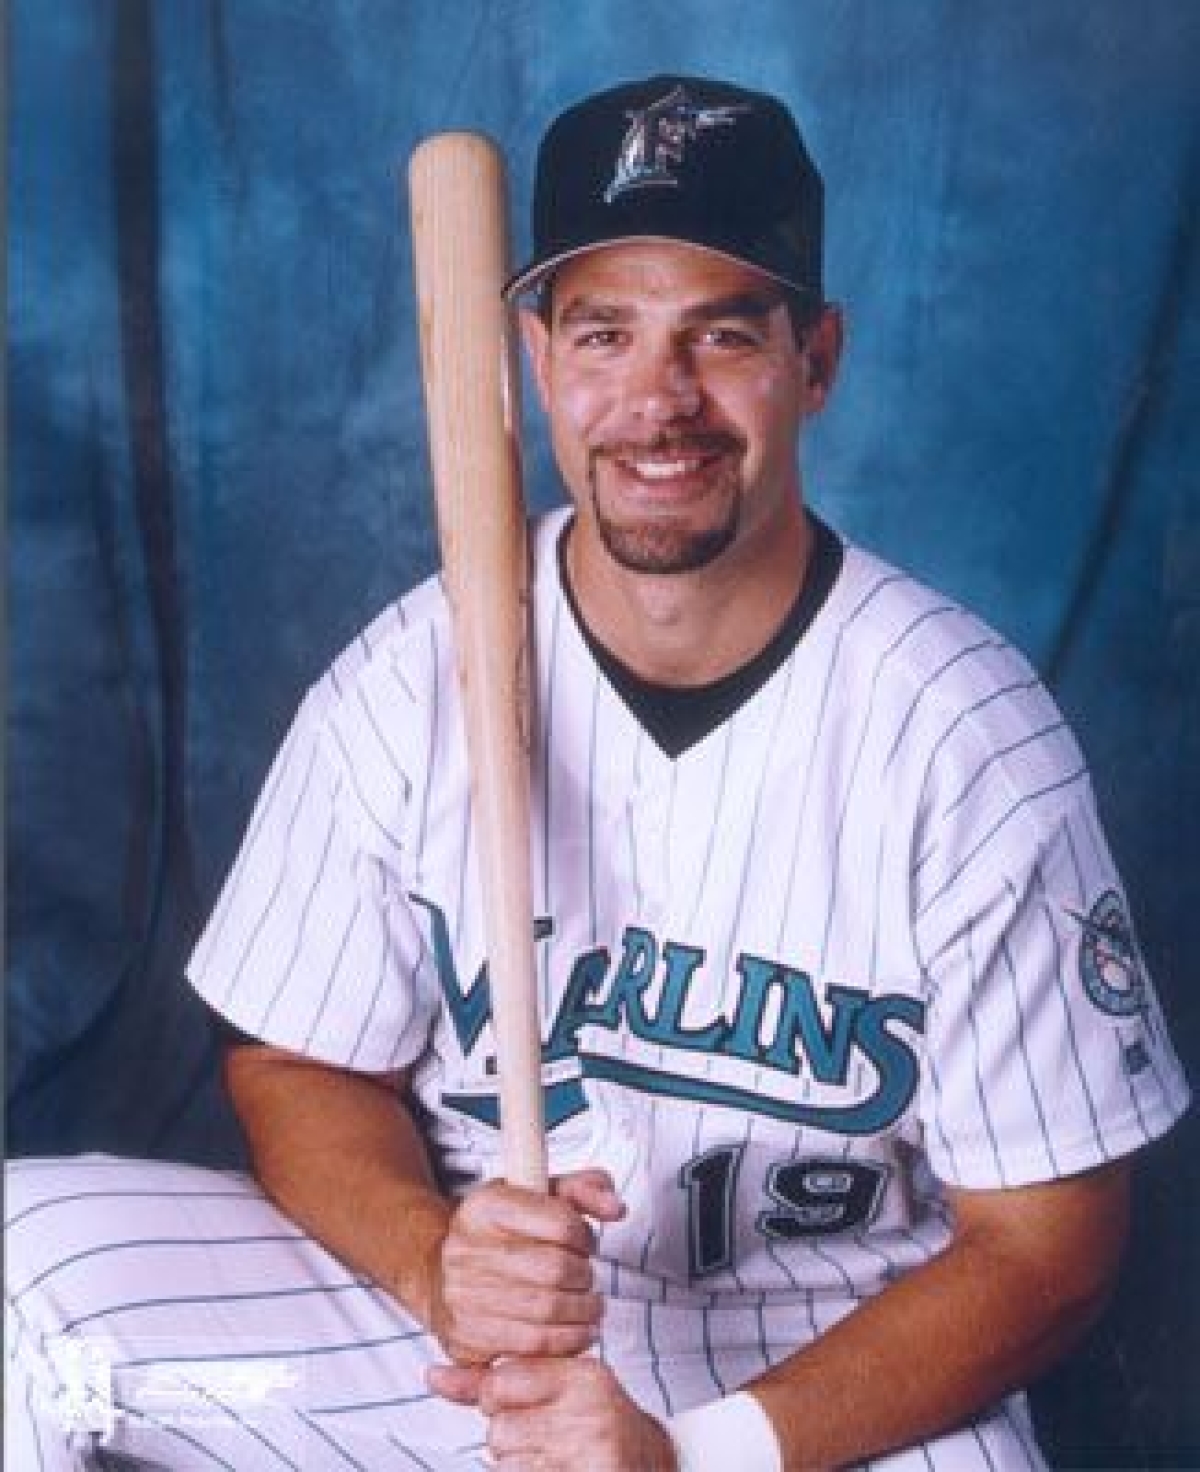 Not in Hall of Fame - 11. Mike Lowell